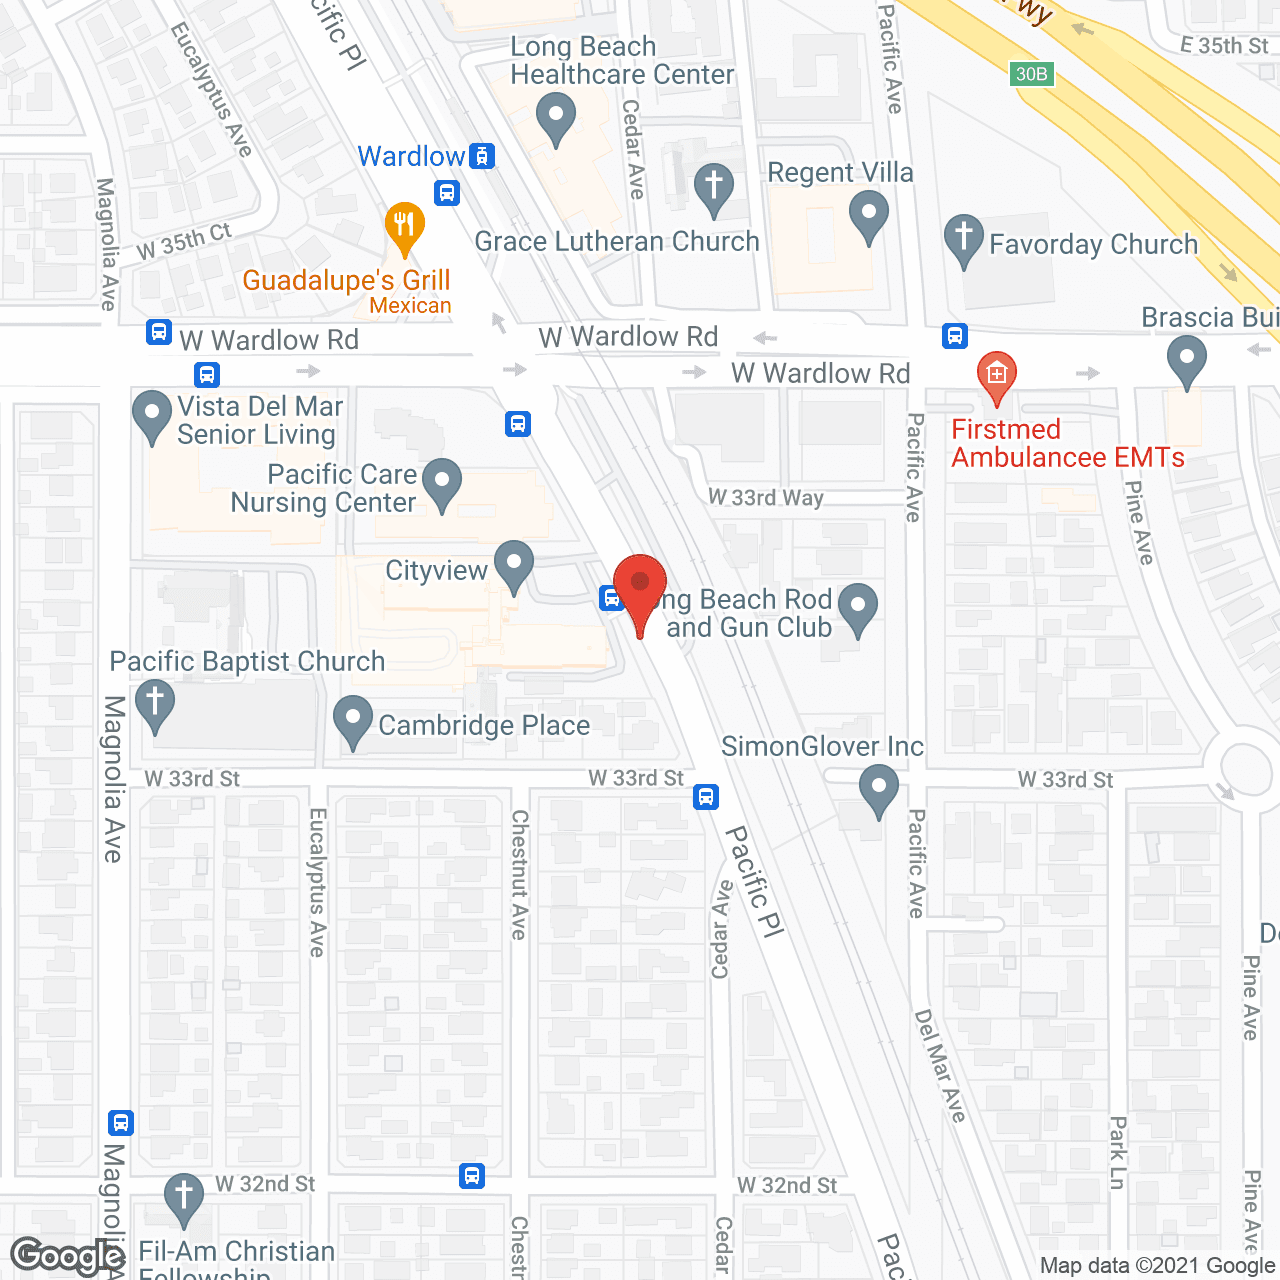 CityView Apartments in google map